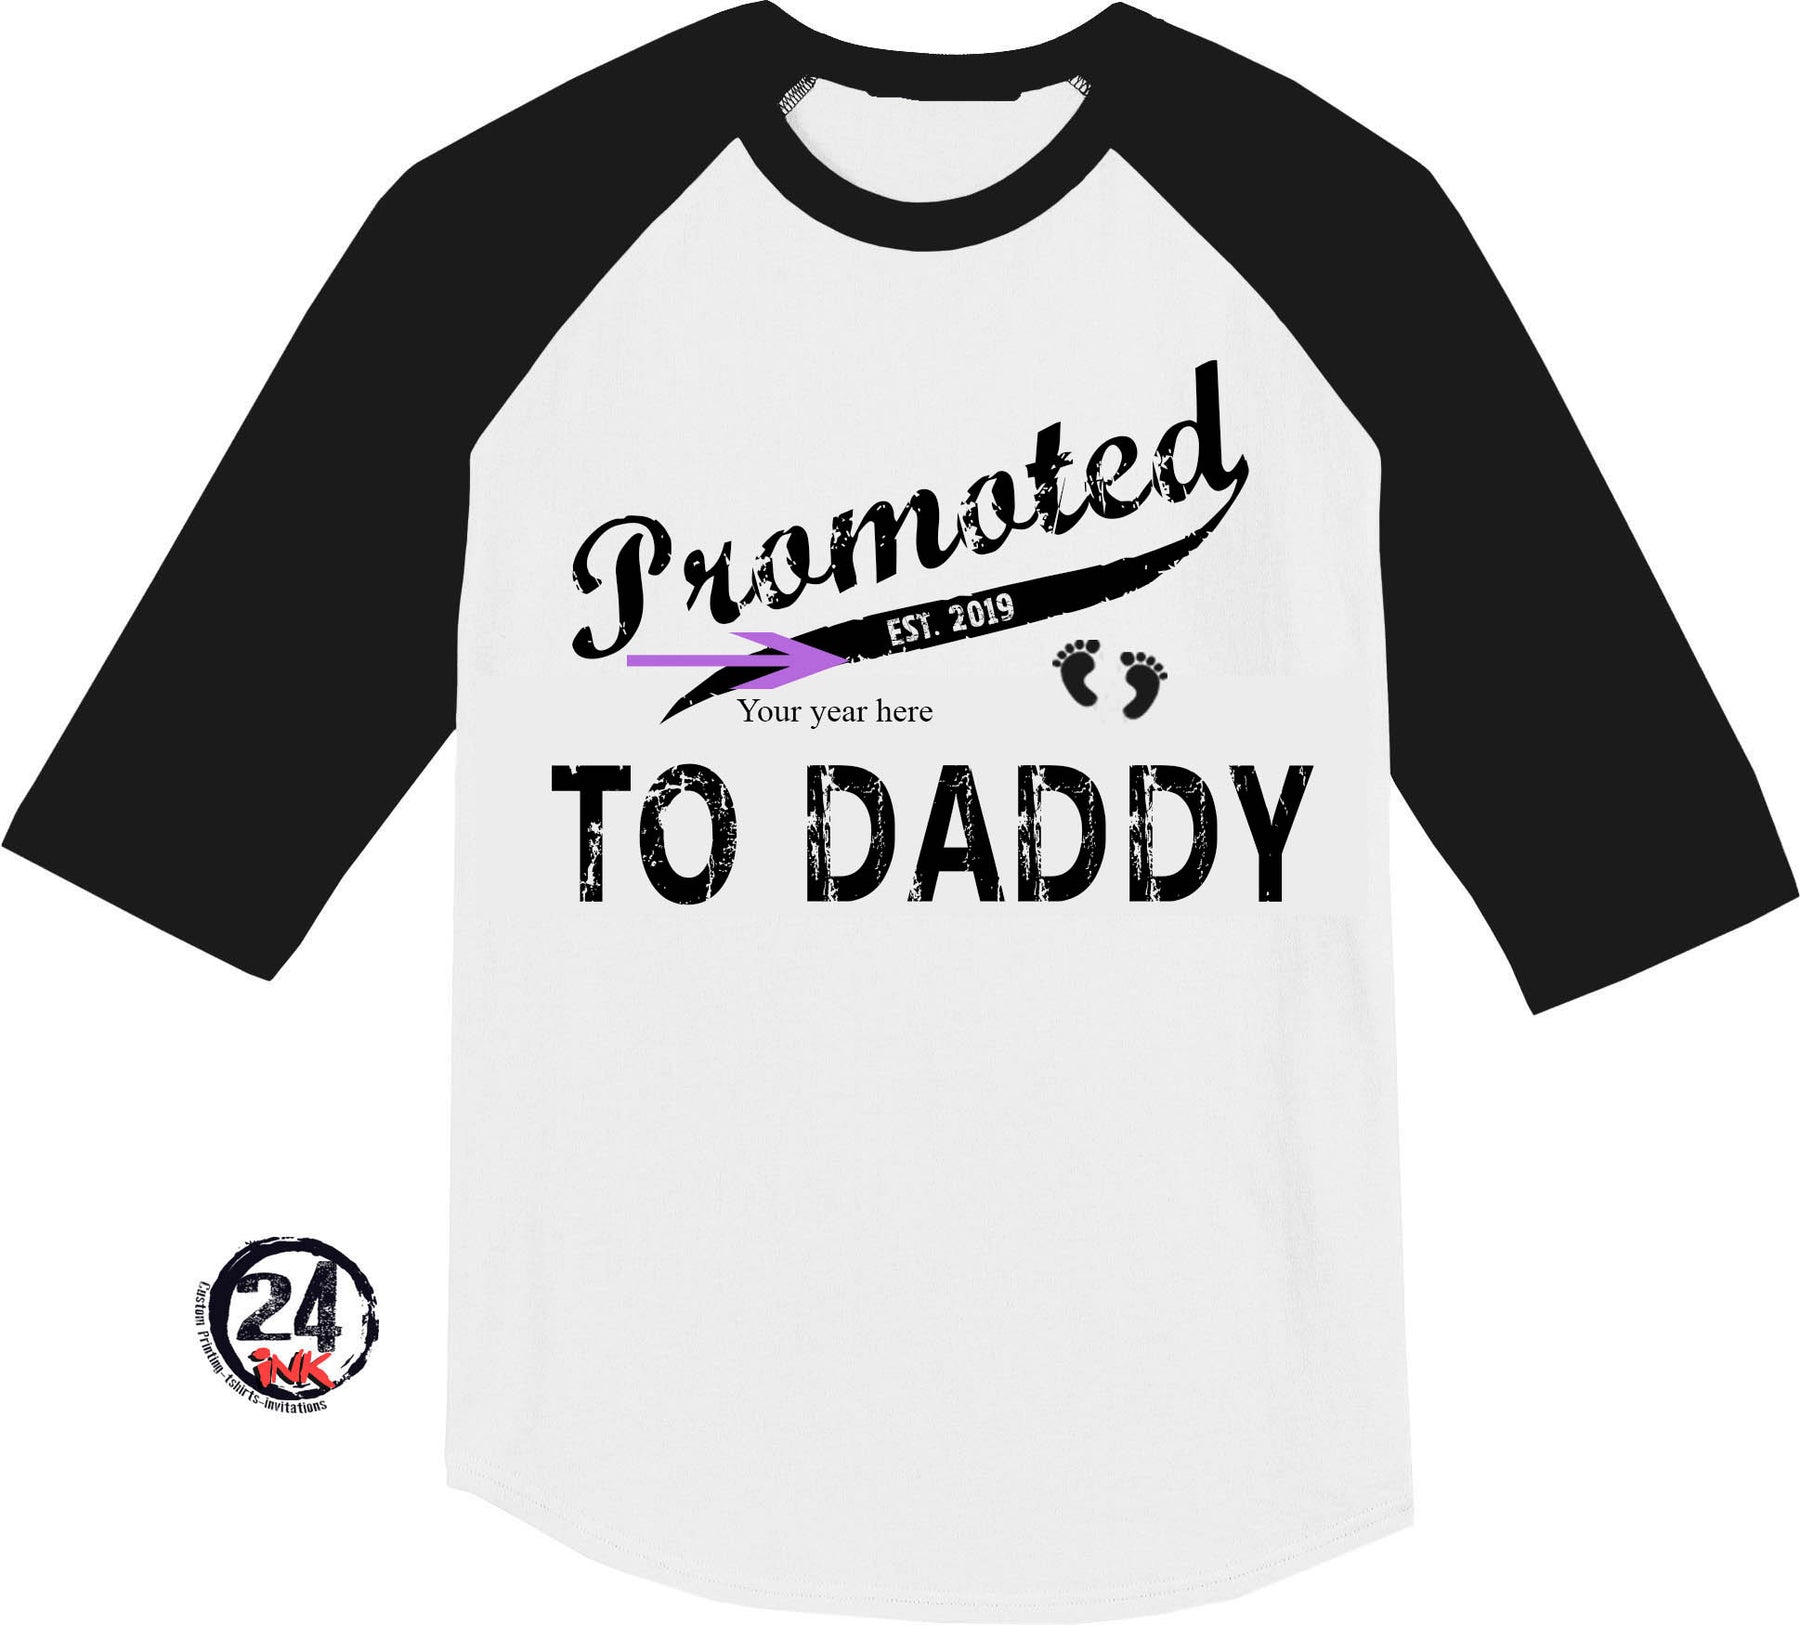 Promoted to Daddy T-shirt